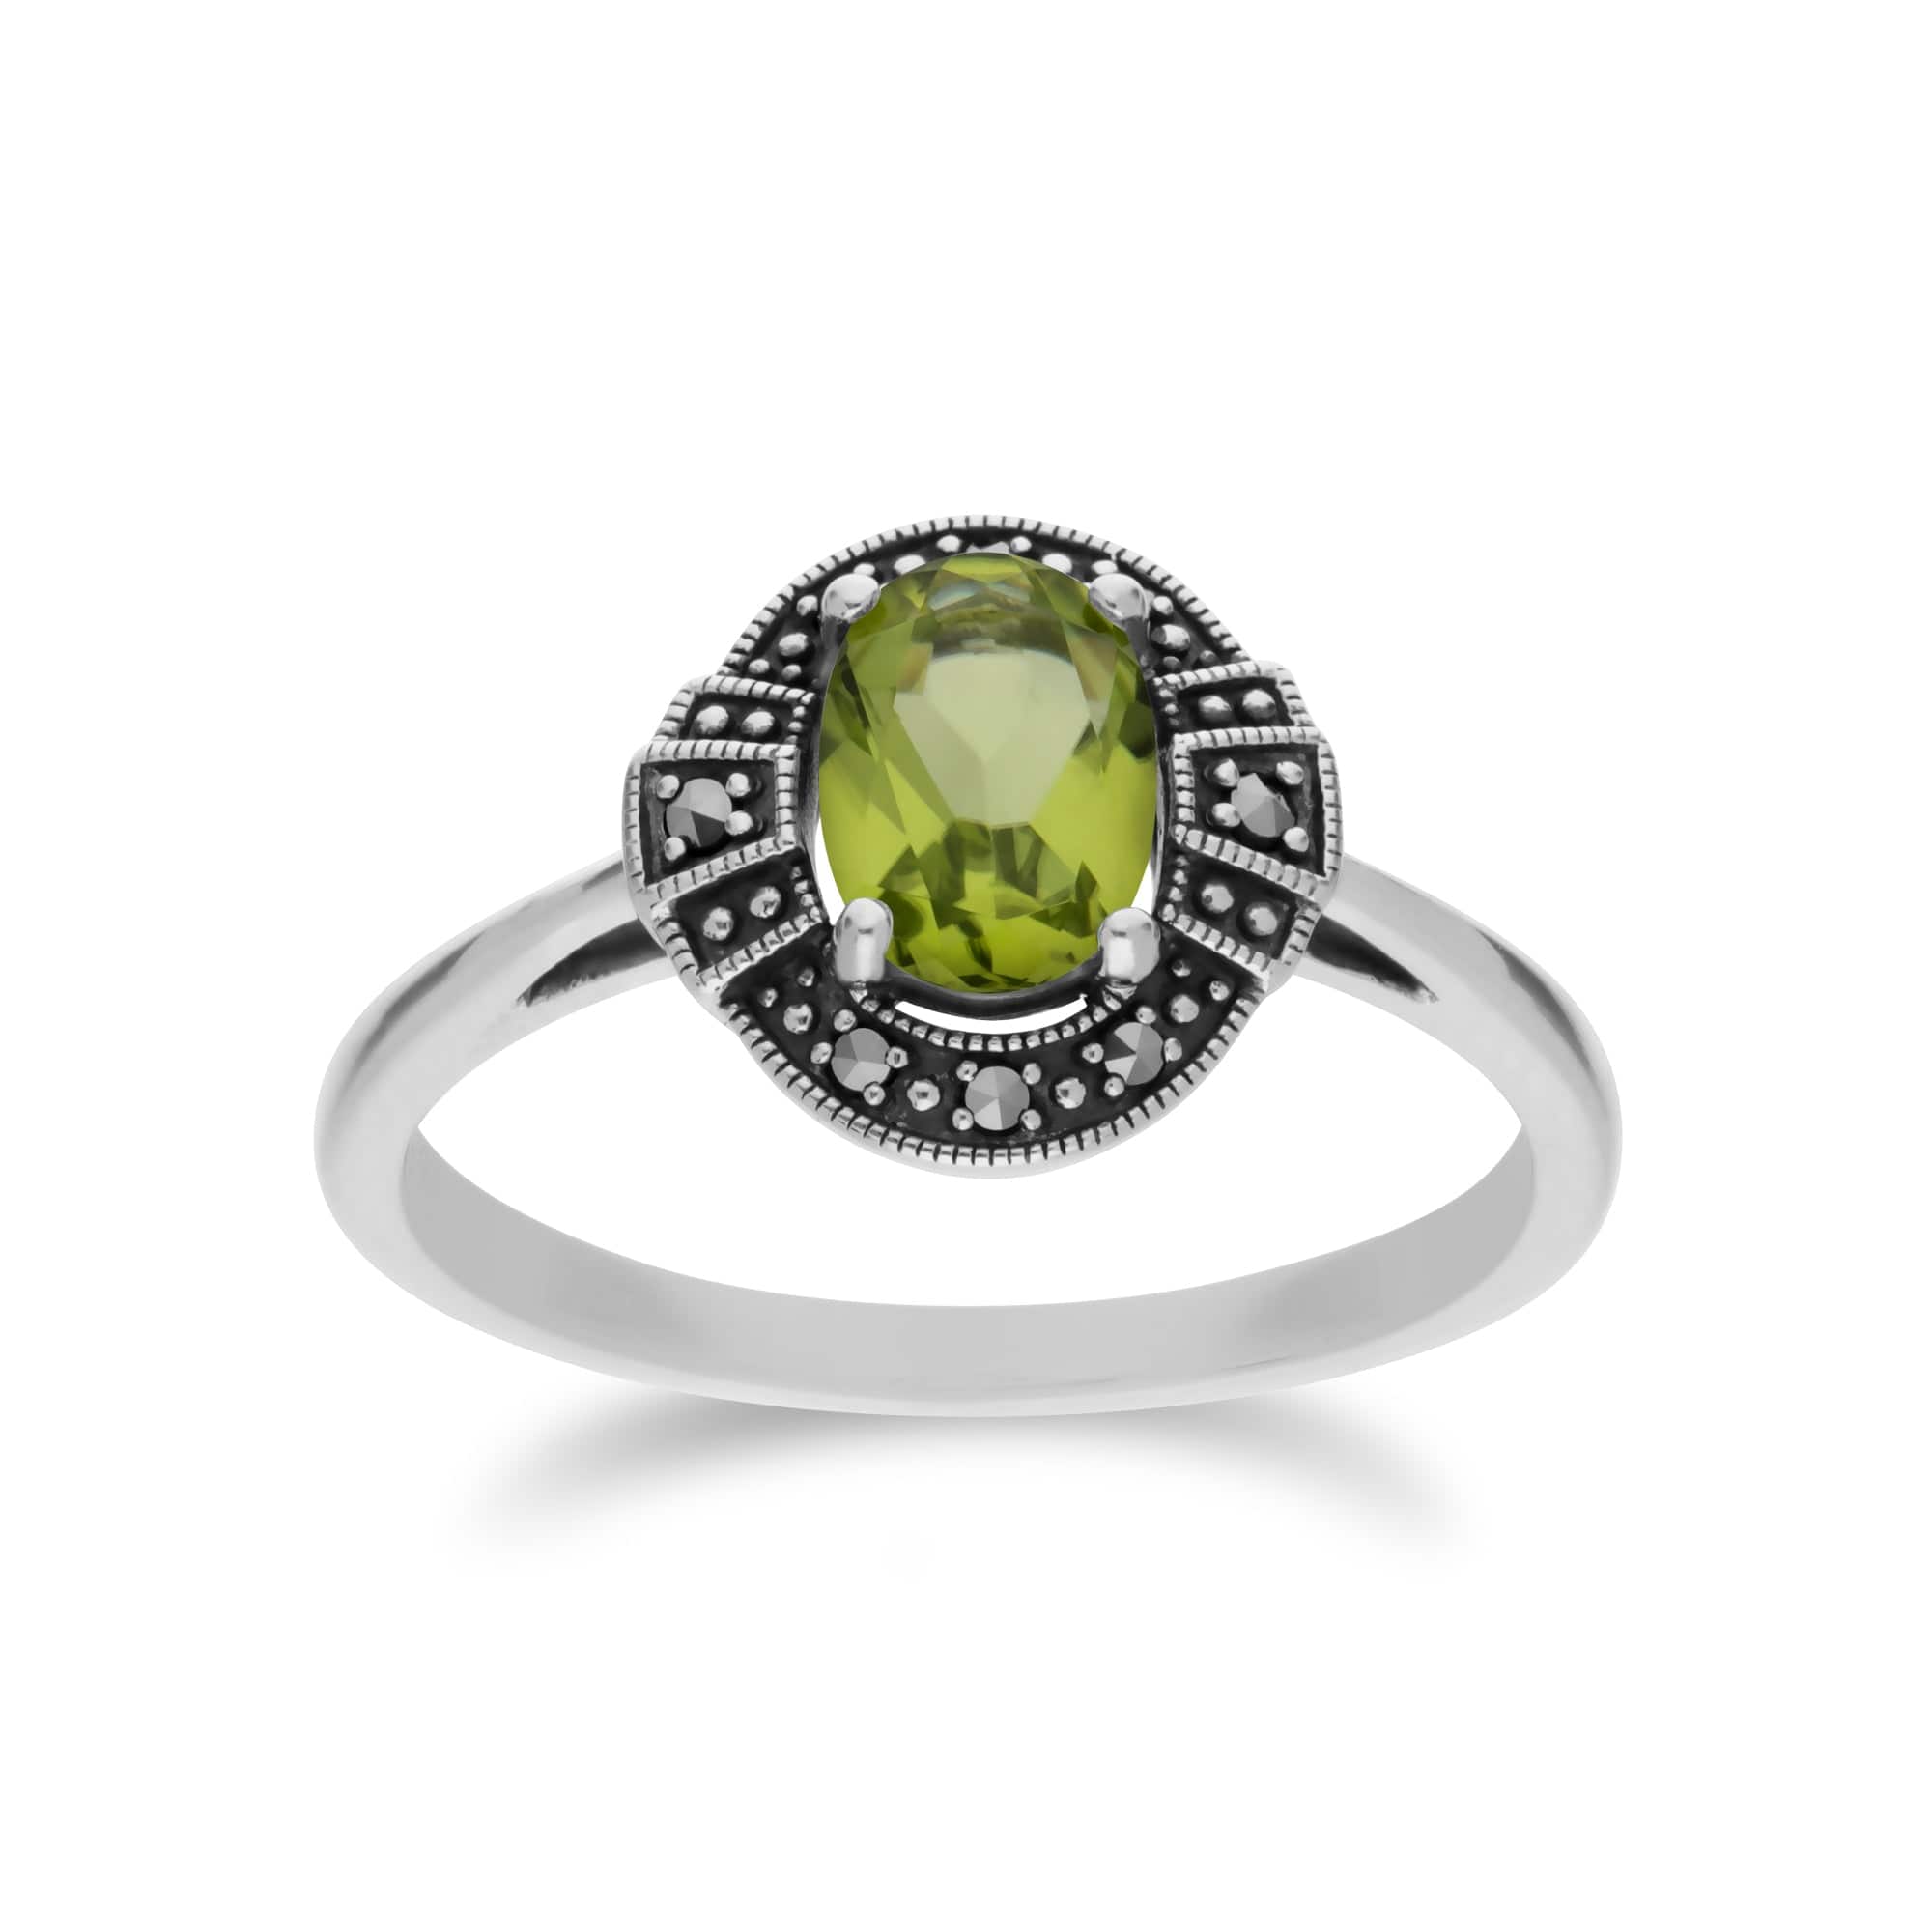 214P303304925-214R605704925 Art Deco Style Oval Peridot and Marcasite Cluster Ring & Pendant Set in 925 Sterling Silver 3